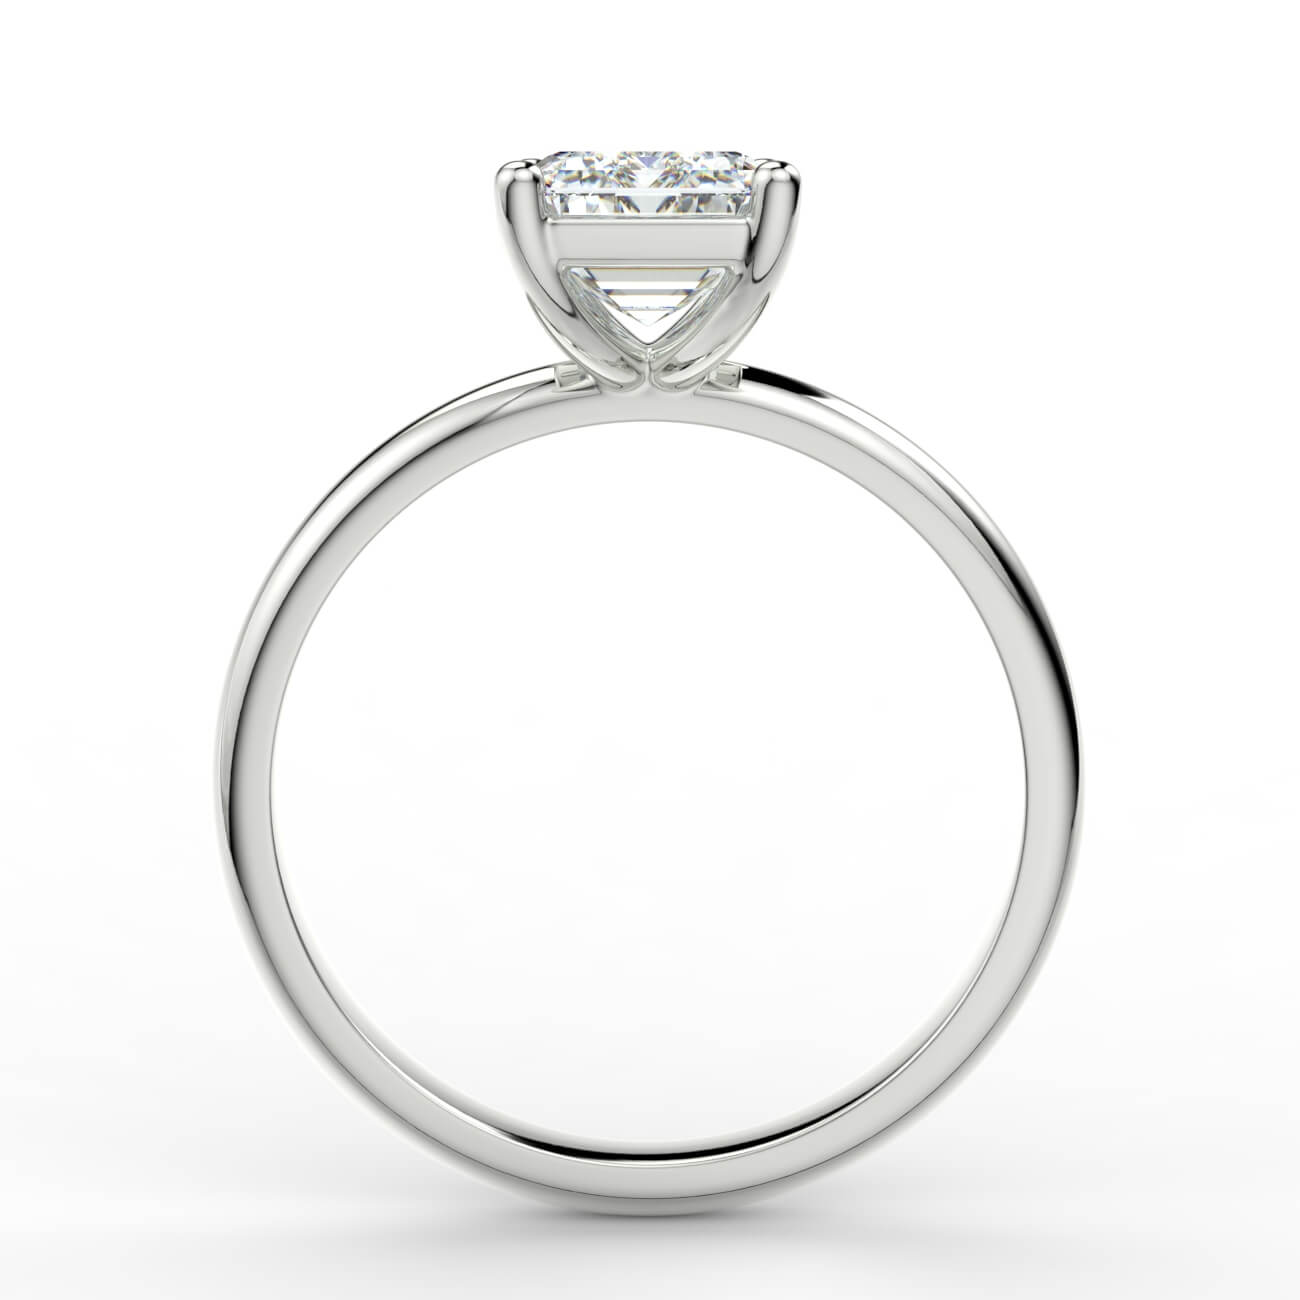 Comfort fit 4 claw emerald cut solitaire diamond ring in white gold – Australian Diamond Network